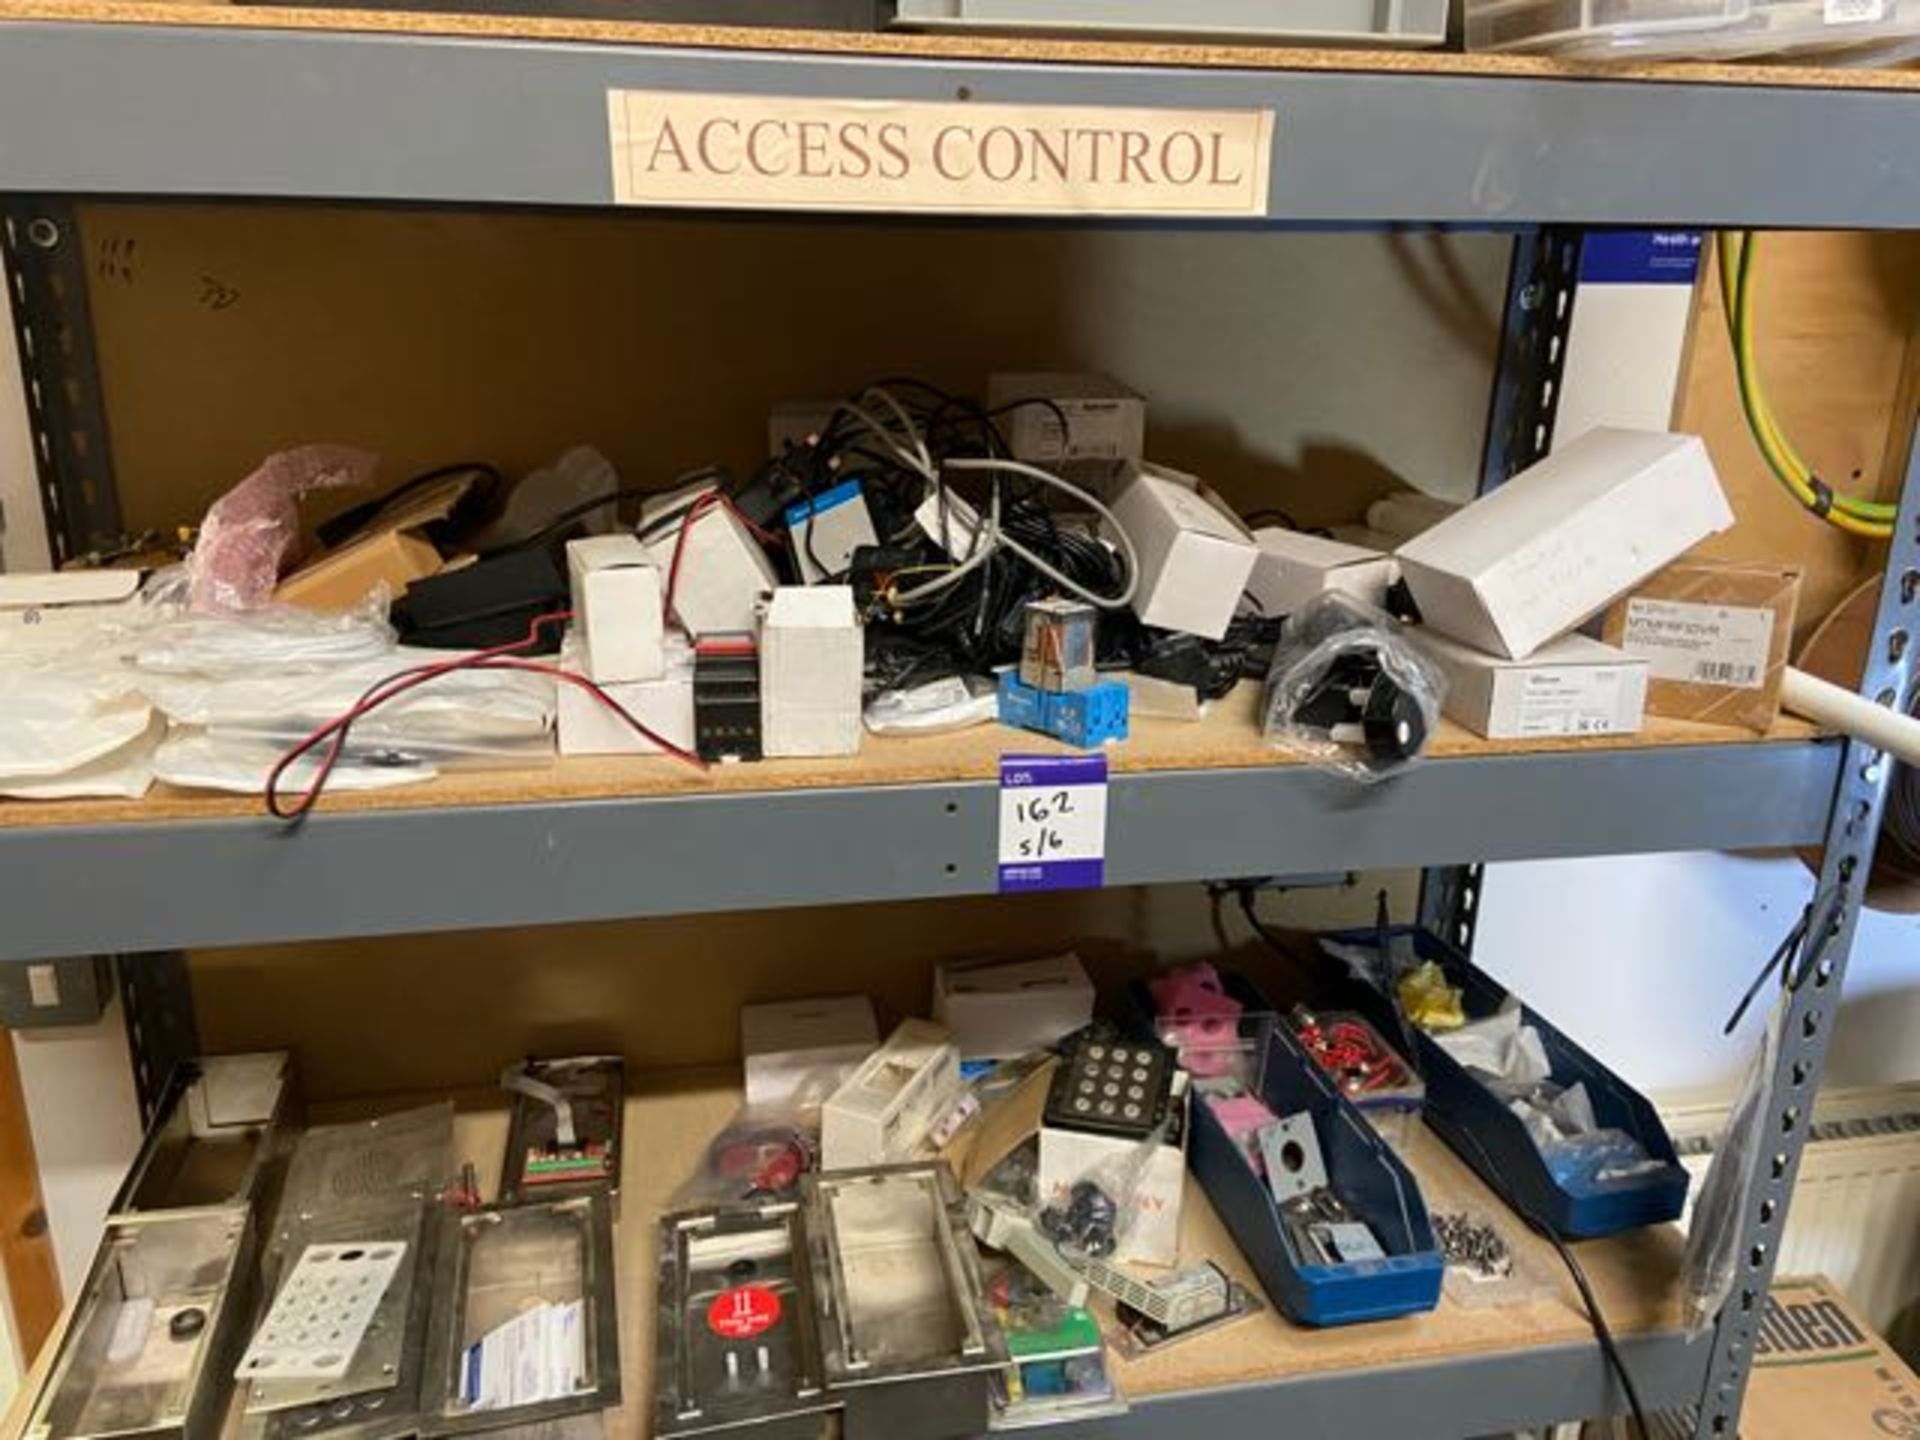 Electric Gate Equipment and Access controls - Image 14 of 19